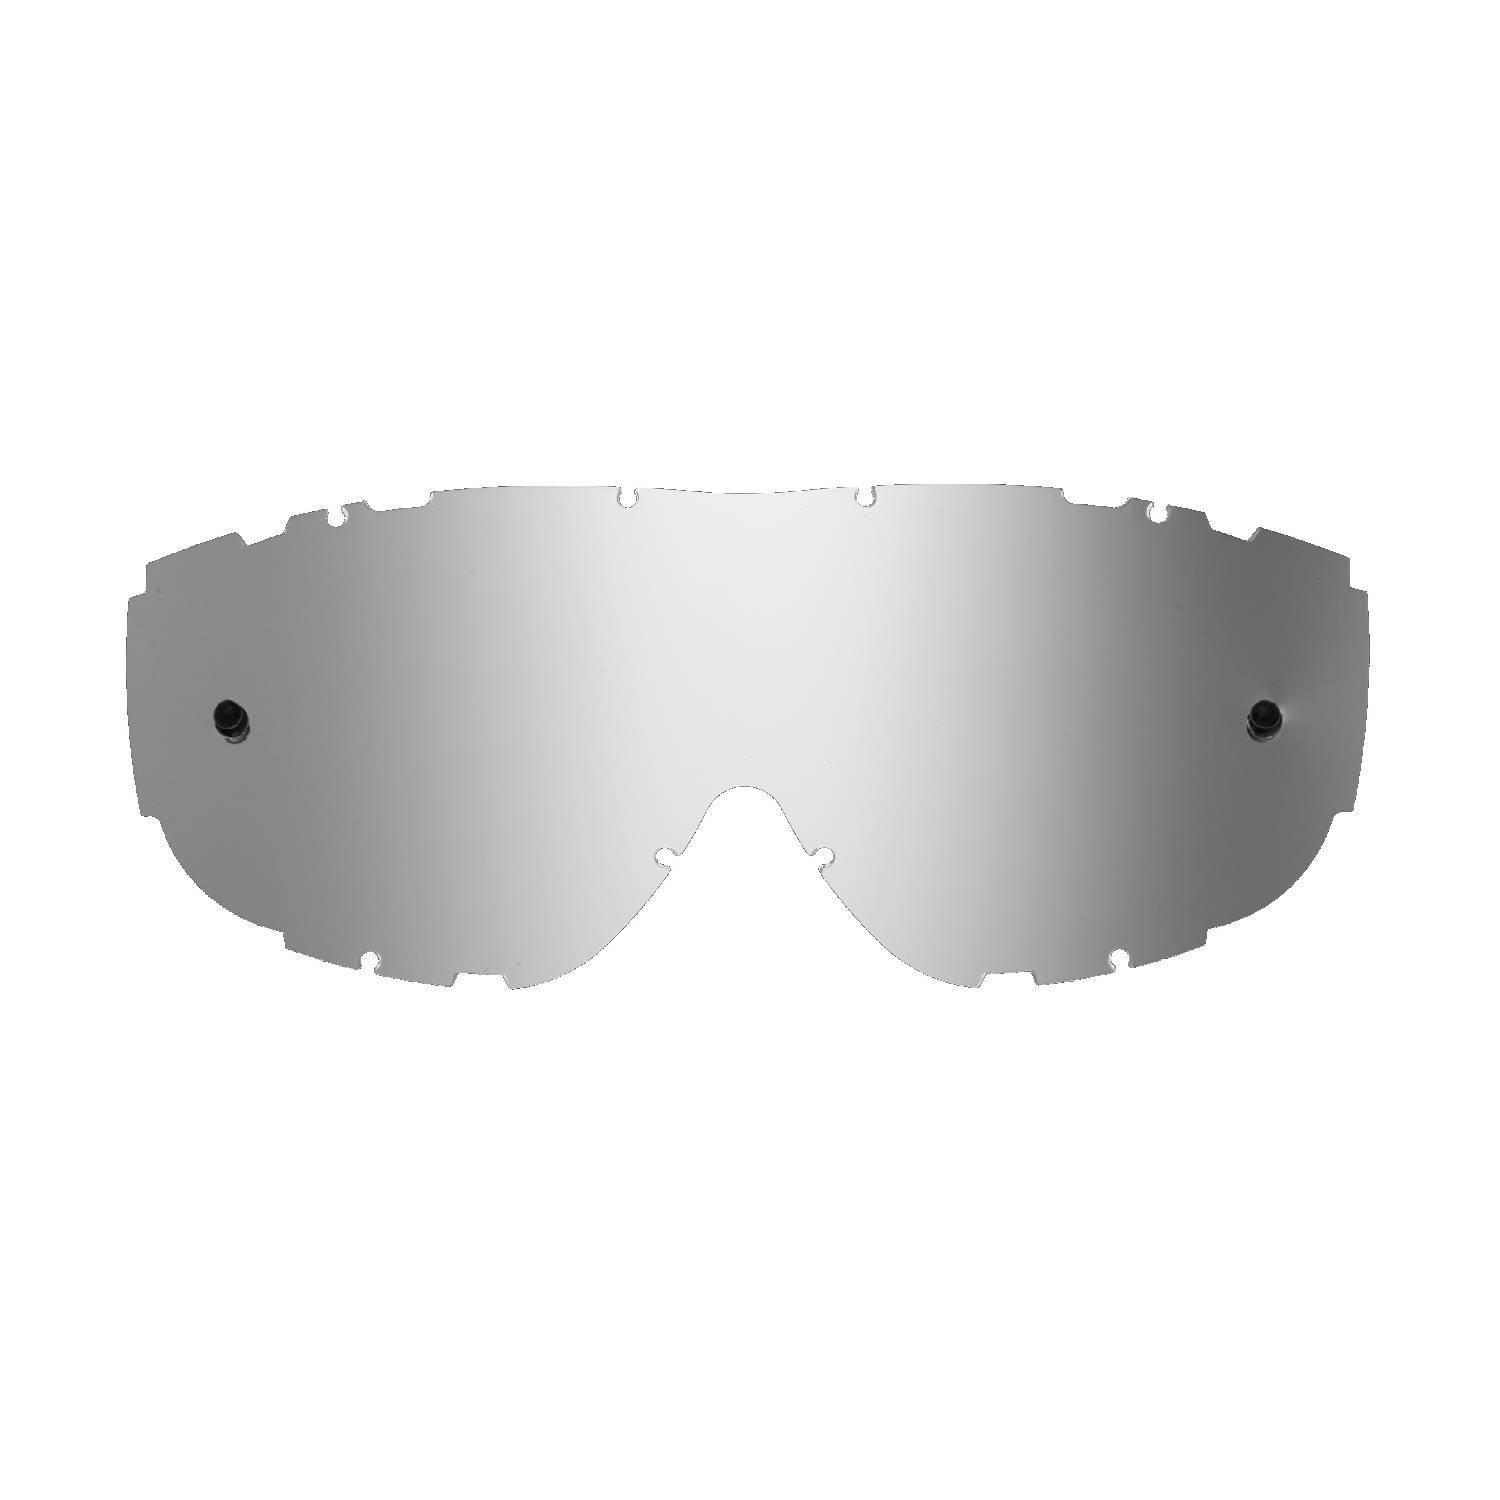 silver-toned mirrored replacement lenses for goggles compatible for Smith Piston goggle